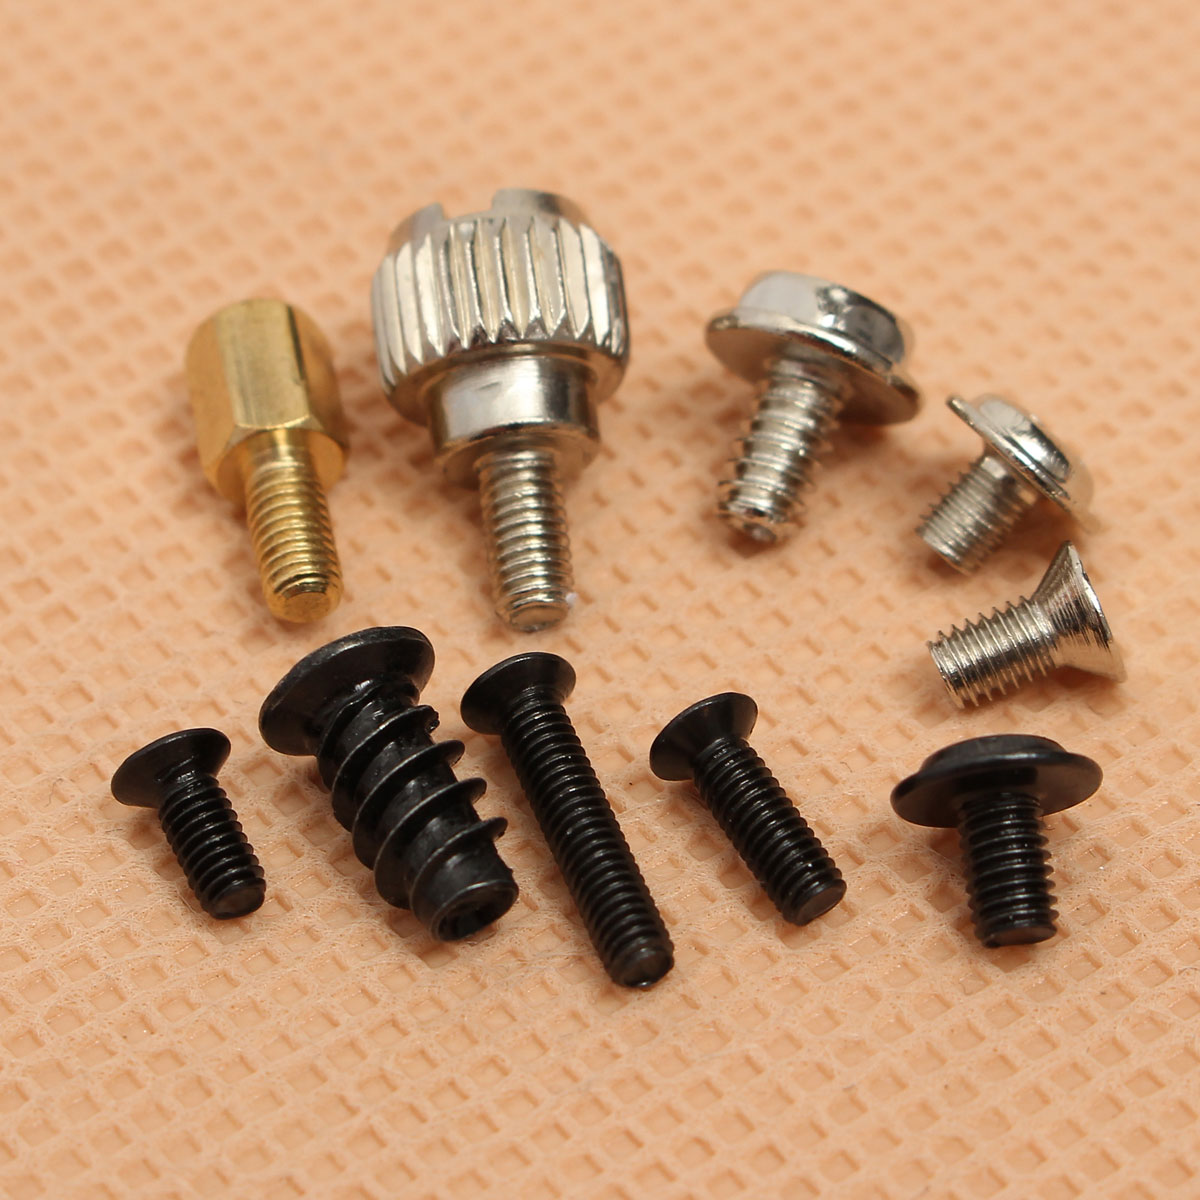 What Kind of Screws Will Meet the Requirements of Your Automatic Screw Lock Machine?